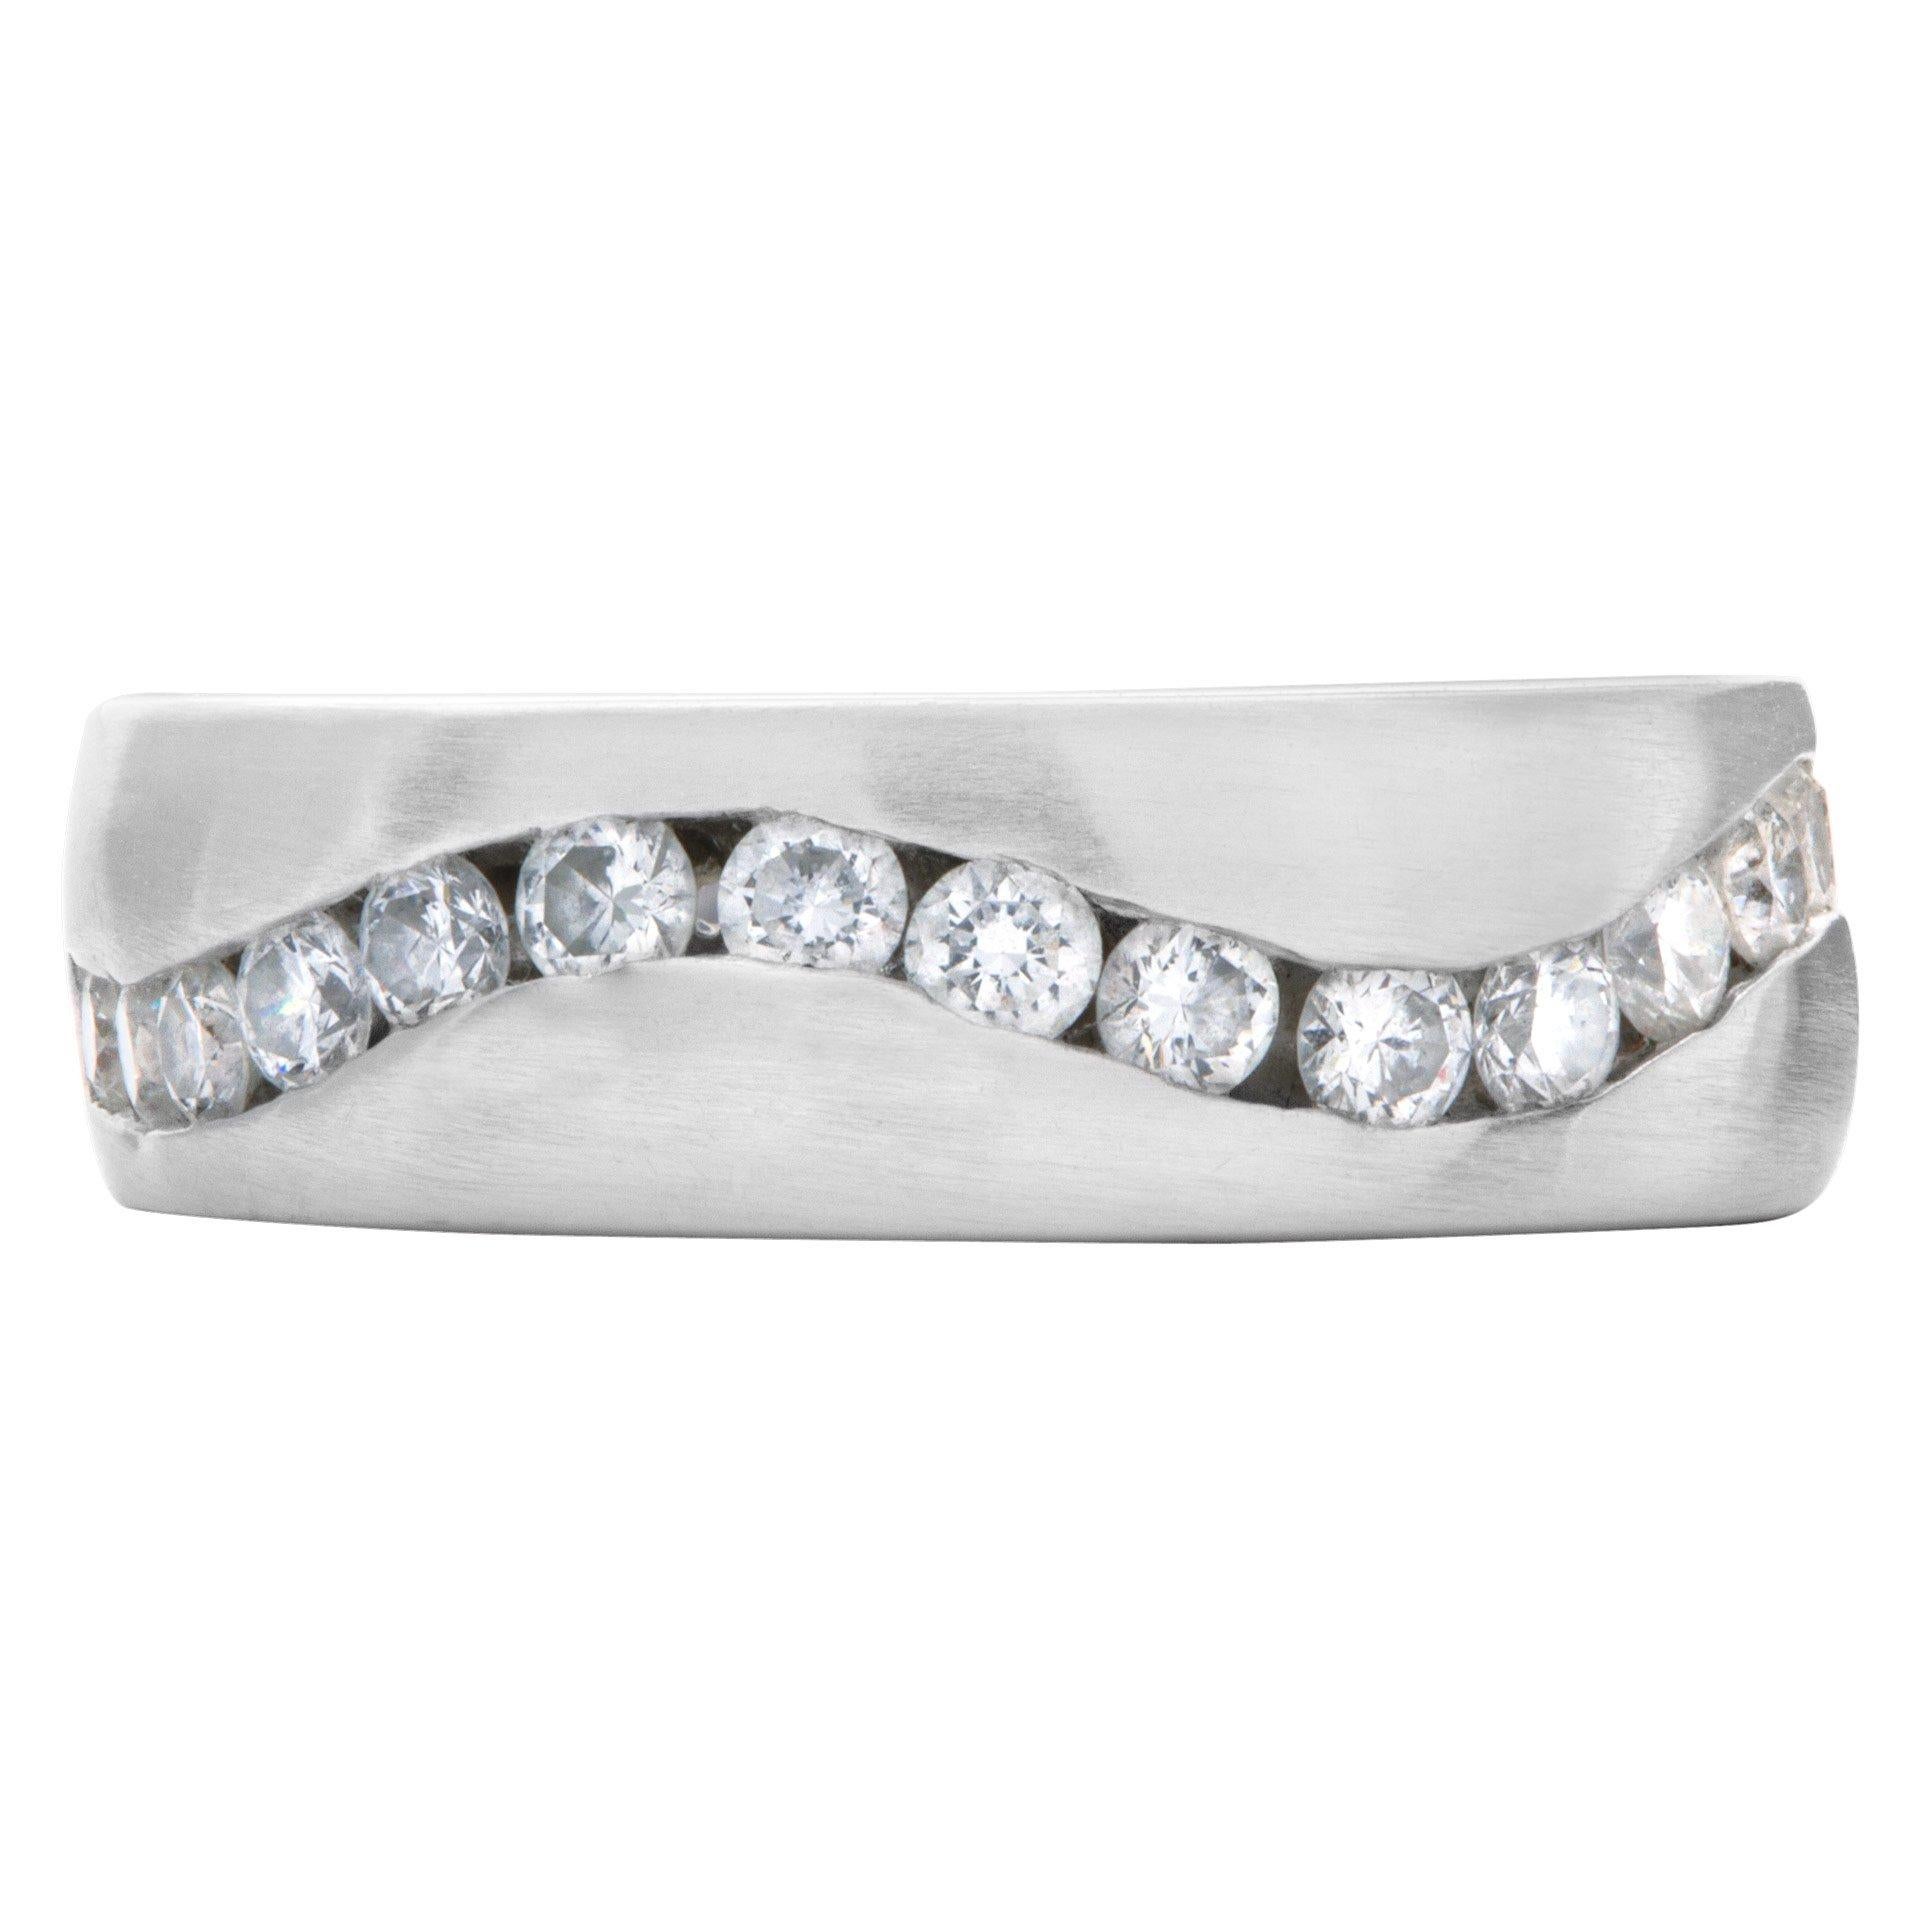 Wave of channel set diamonds wedding band in 14k white gold. Approximately 0.75 carat in diamonds. 7mm width. Ring size 9.

This Diamond ring is currently size 9 and some items can be sized up or down, please ask! It weighs 6.4 pennyweights and is